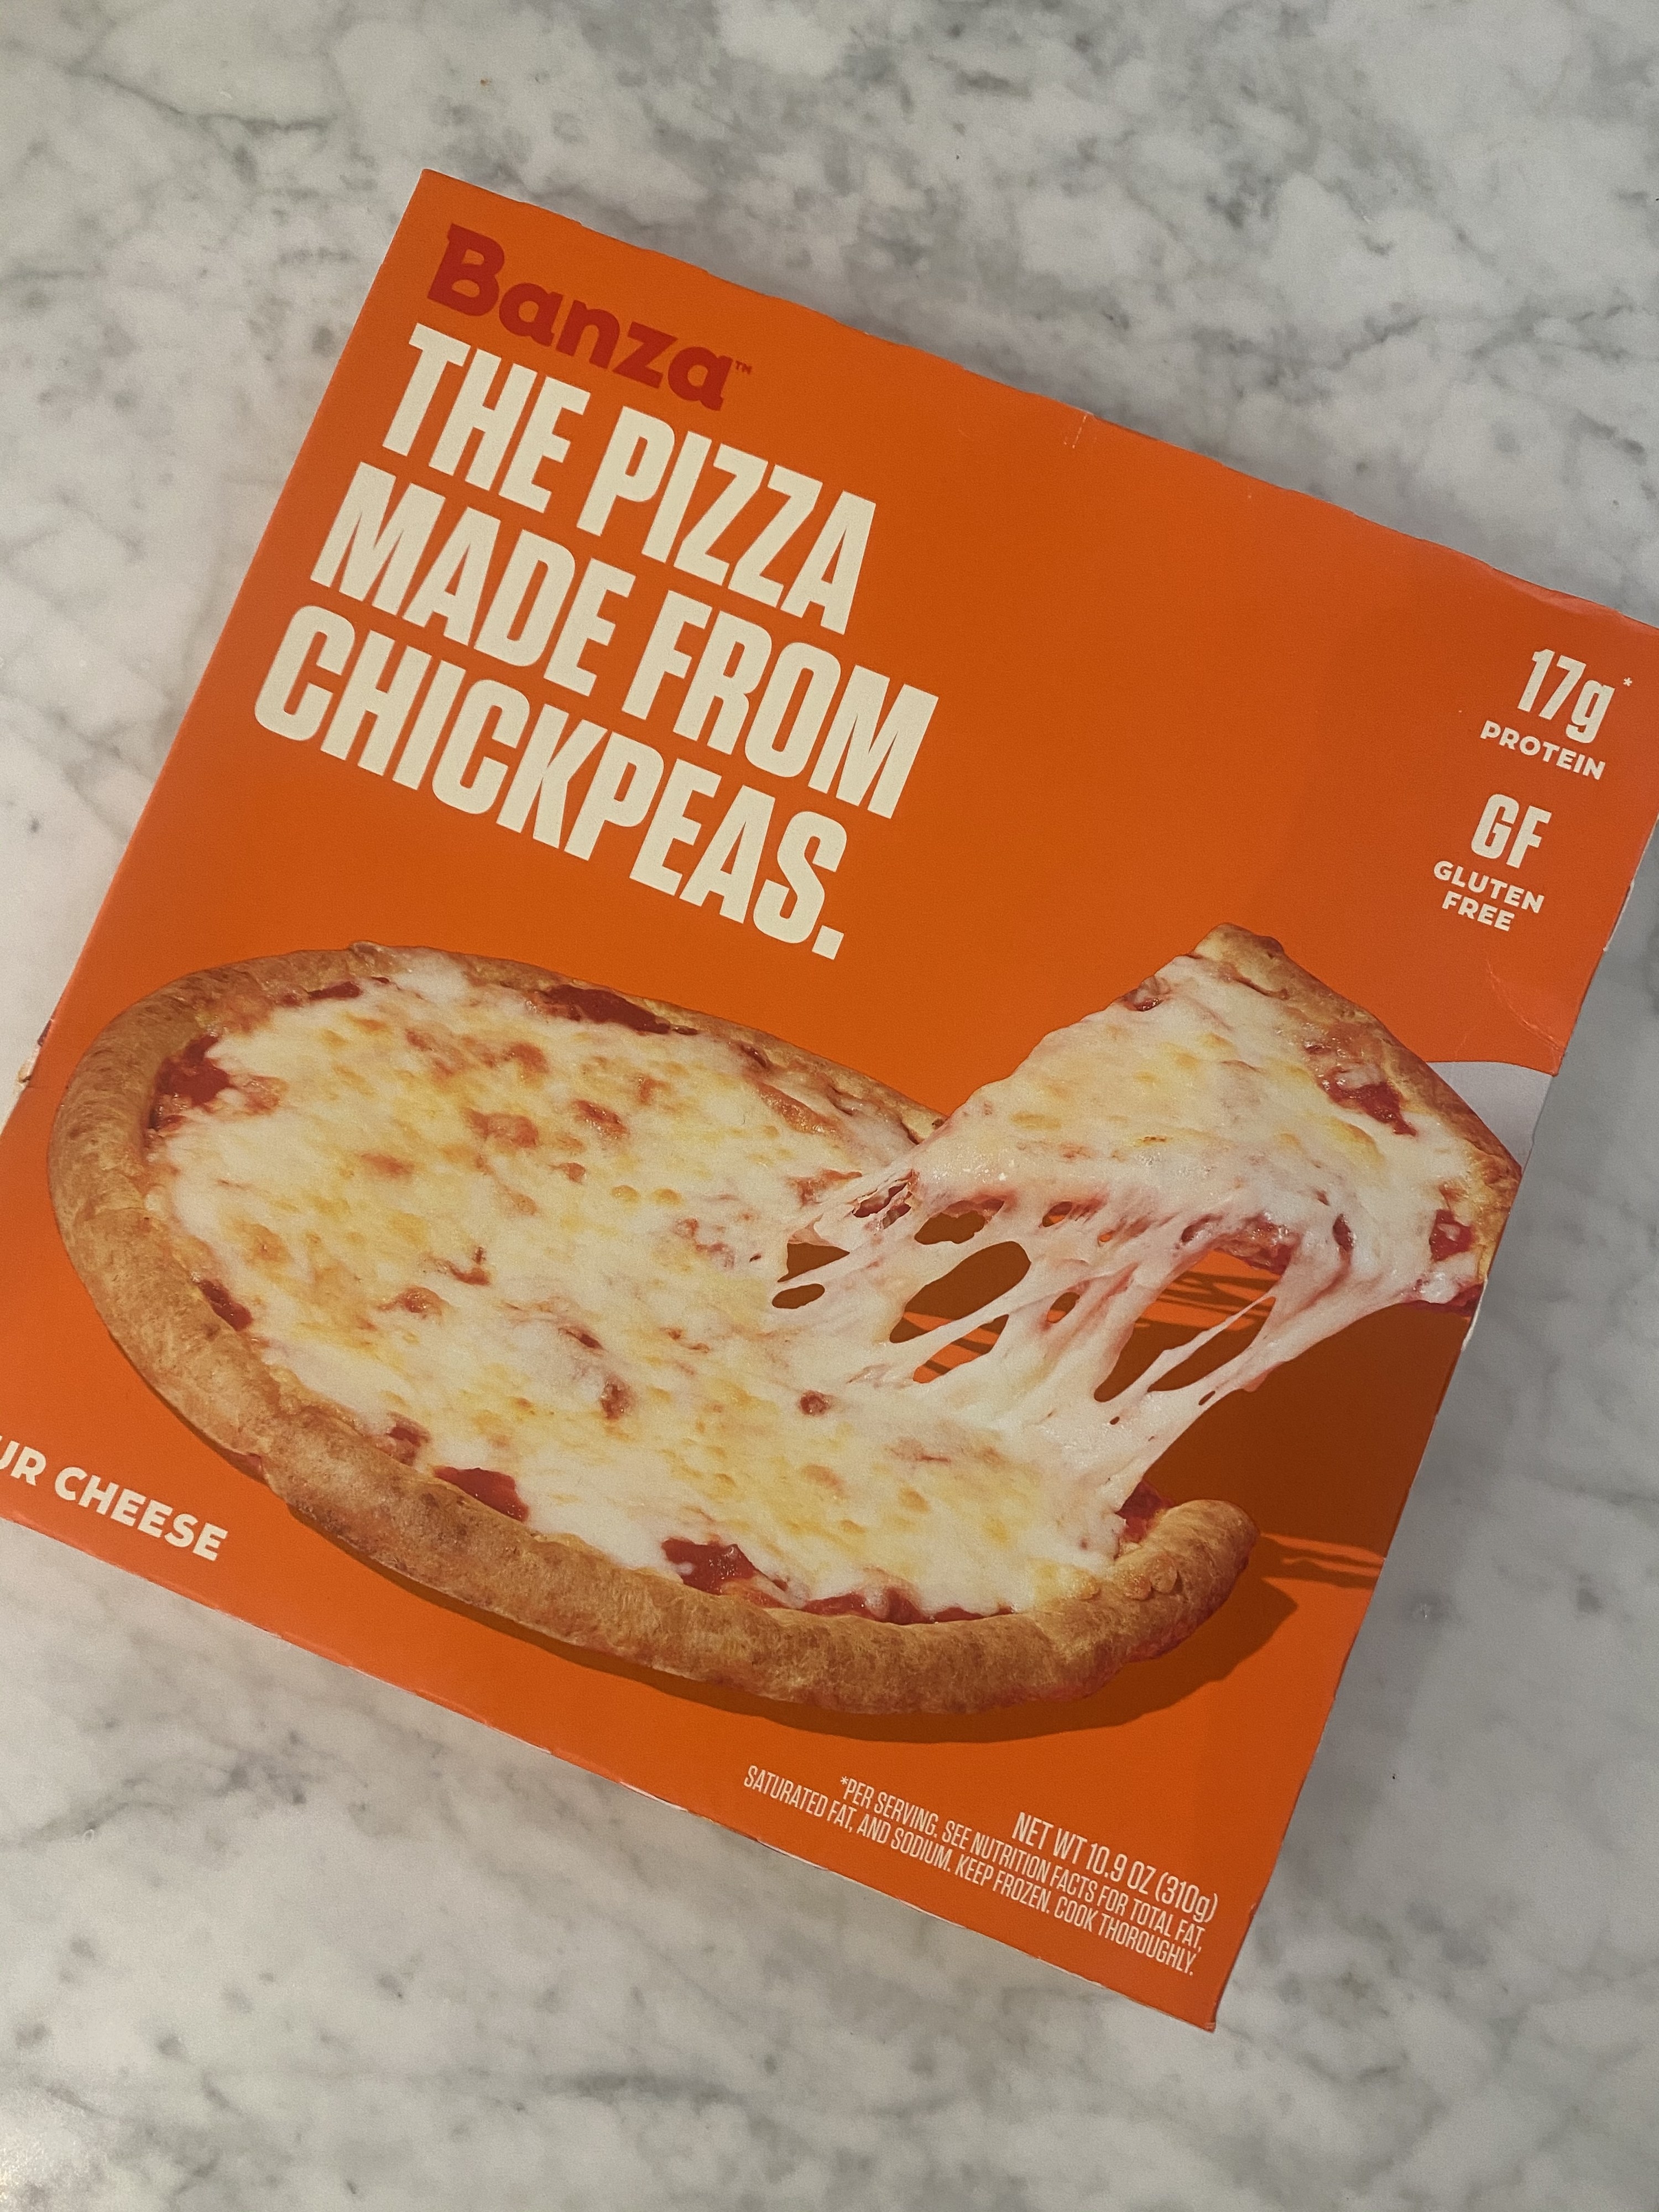 The front of a box of Banza four cheese chickpea crust pizza.